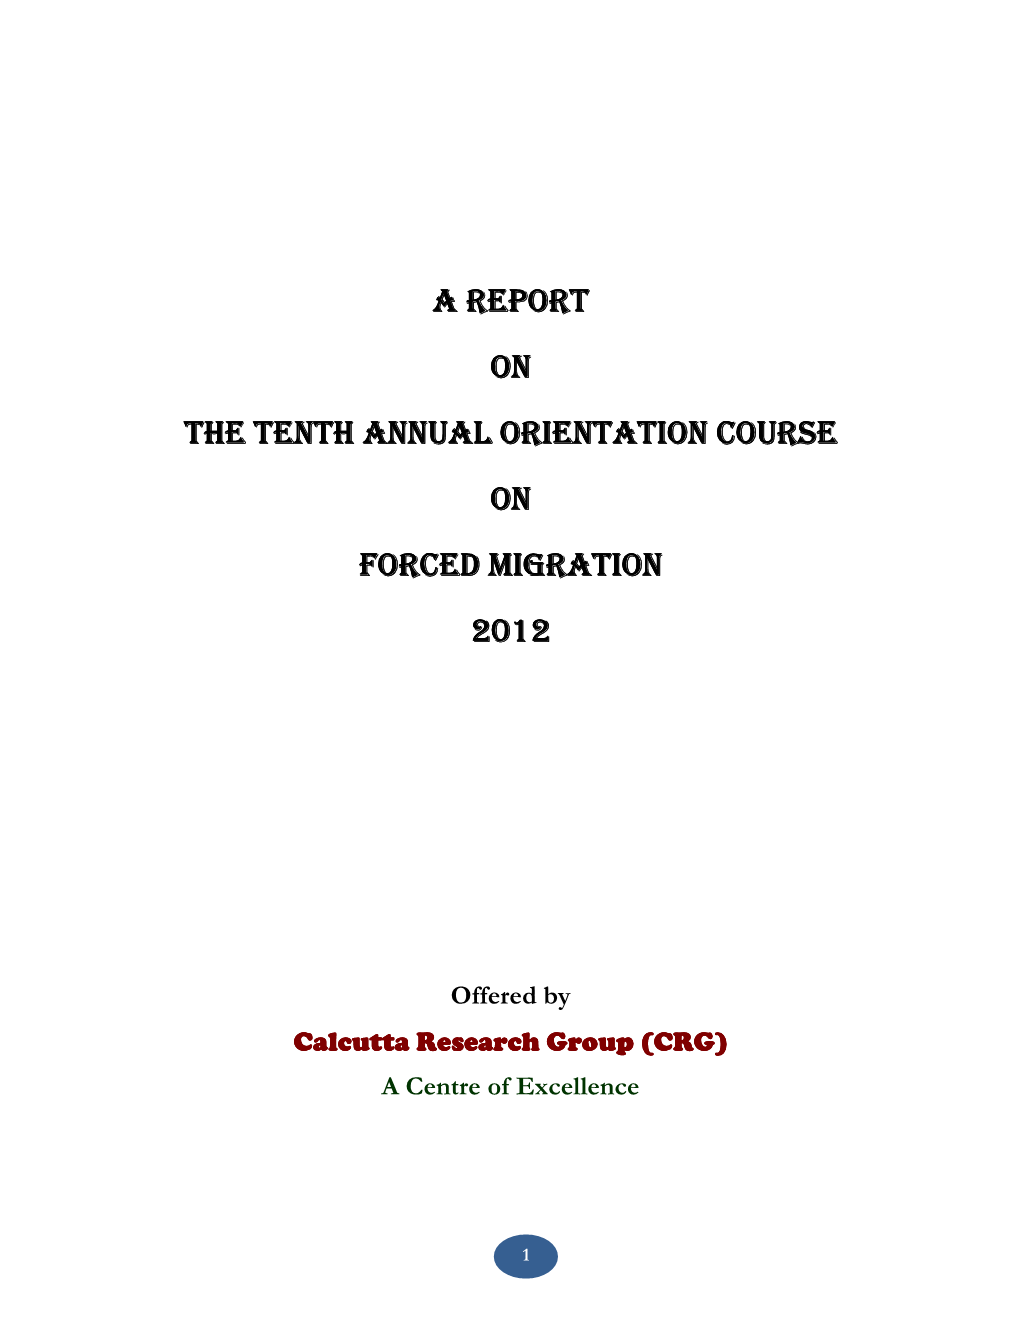 Tenth Annual Orientation Course on Forced Migration 2012